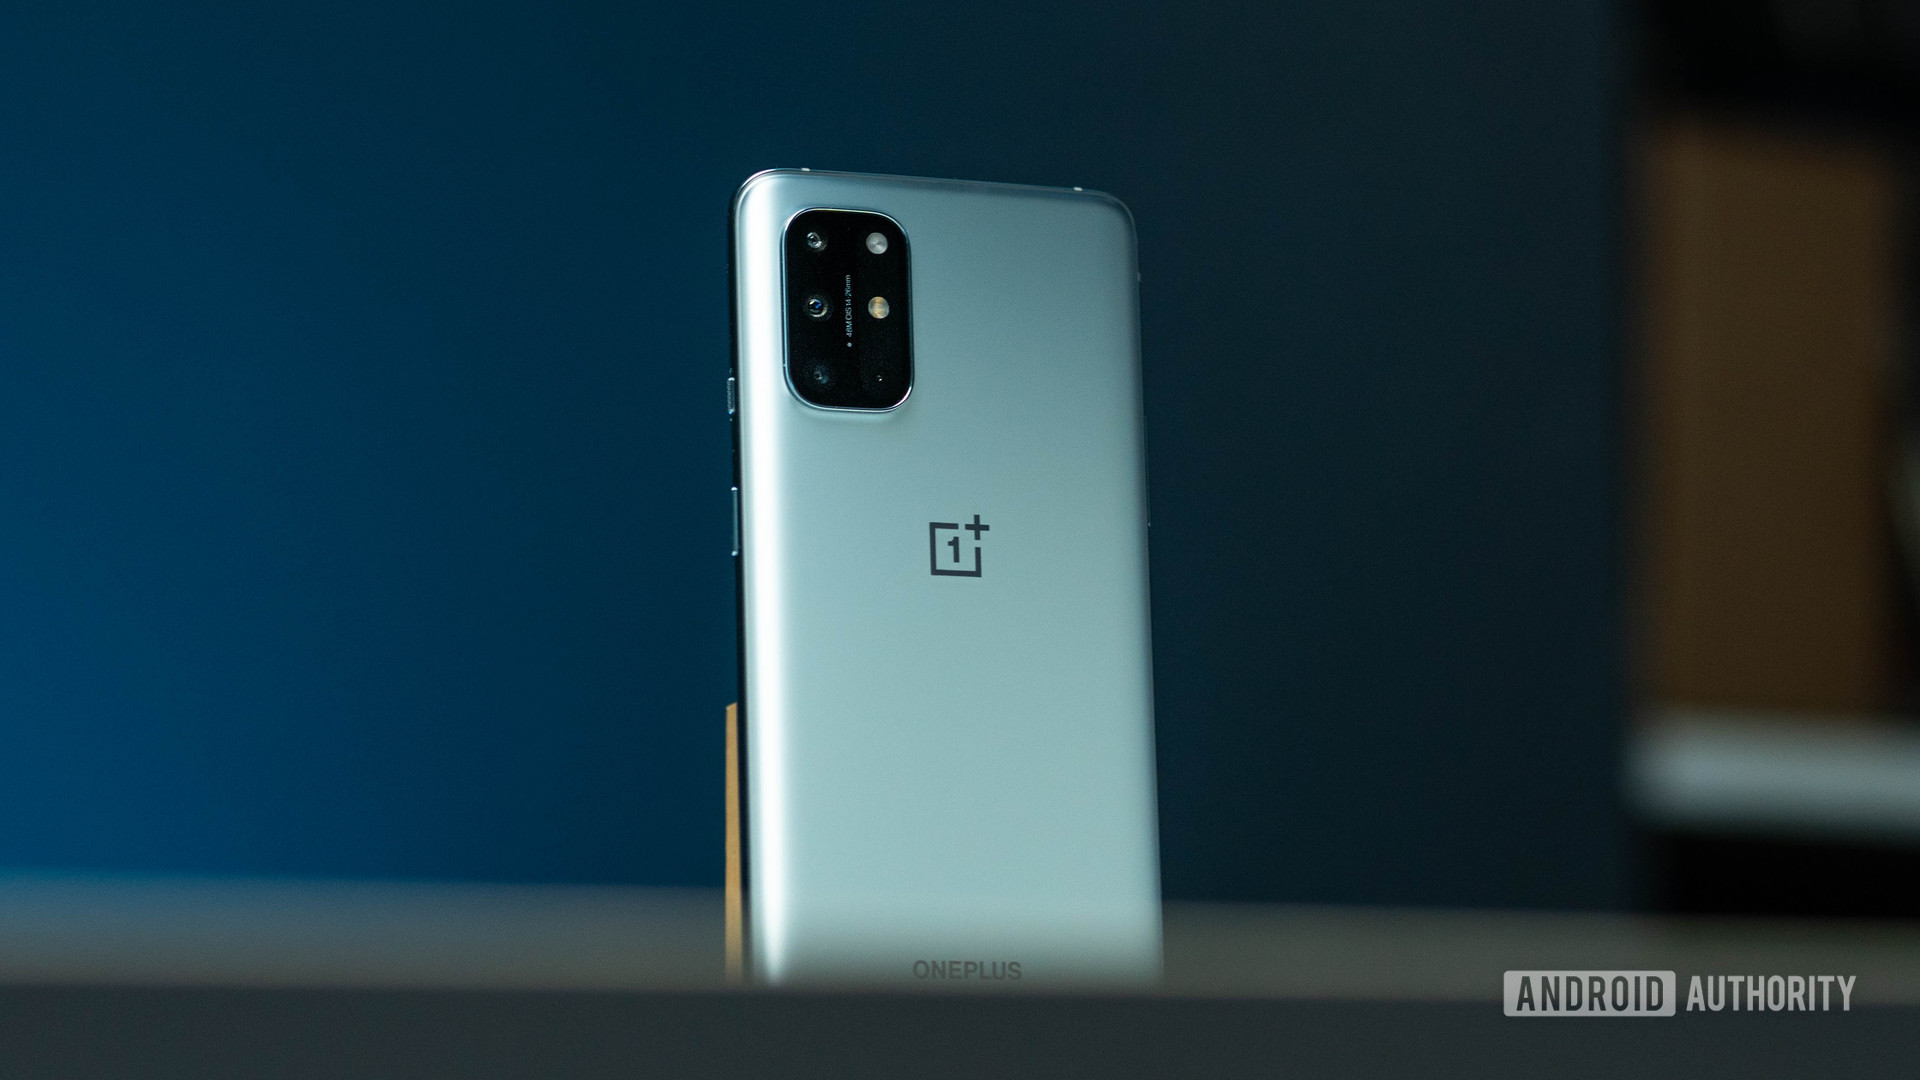 OnePlus 8T showing the rear of the phone and camera module.